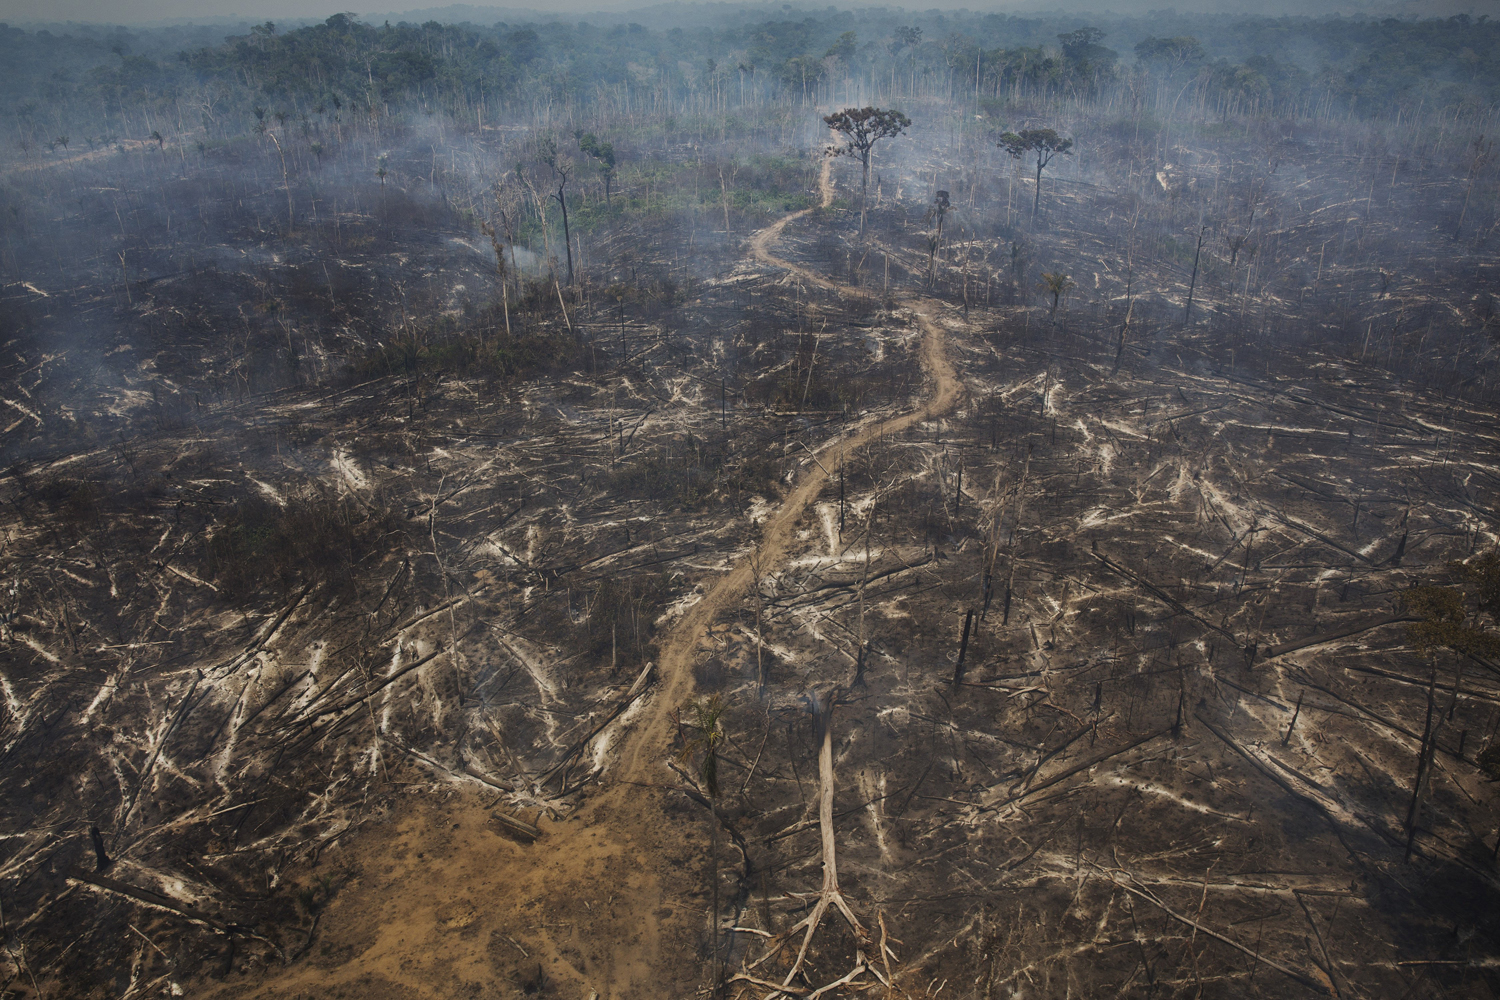 An area of the Amazon rainforest in the Jamanxim National Park, cleared to make way for a cattle pasture, near Novo Progresso, Brazil, Sept. 25, 2014.